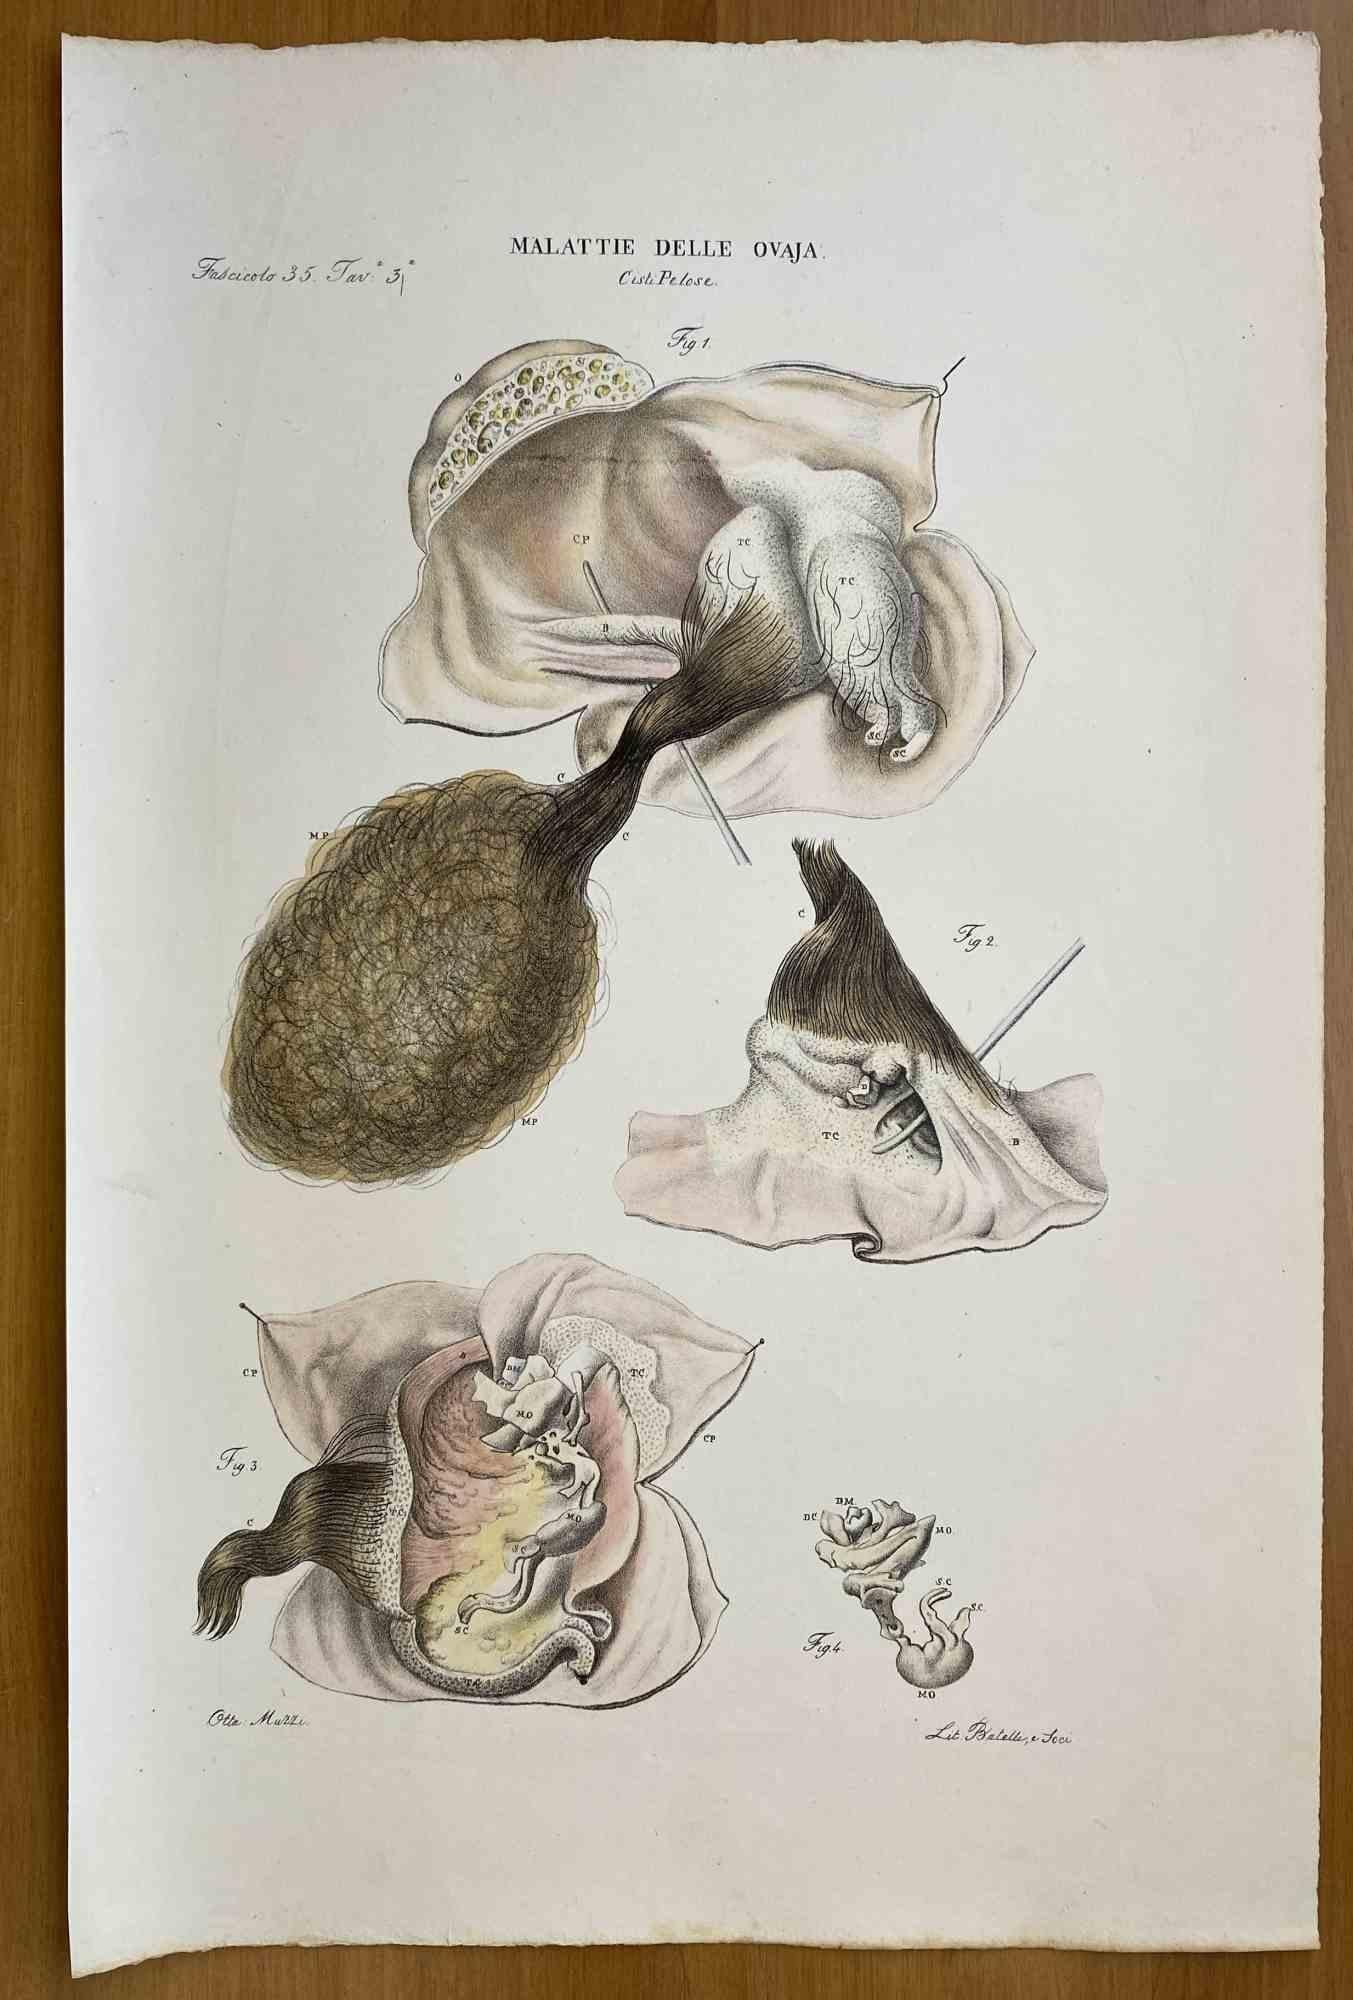 Diseases of the Ovary is a lithograph hand colored by Ottavio Muzzi for the edition of Antoine Chazal, Human Anatomy, Printers Batelli and Ridolfi, 1843.

The work belongs to the Atlante generale della anatomia patologica del corpo umano by Jean